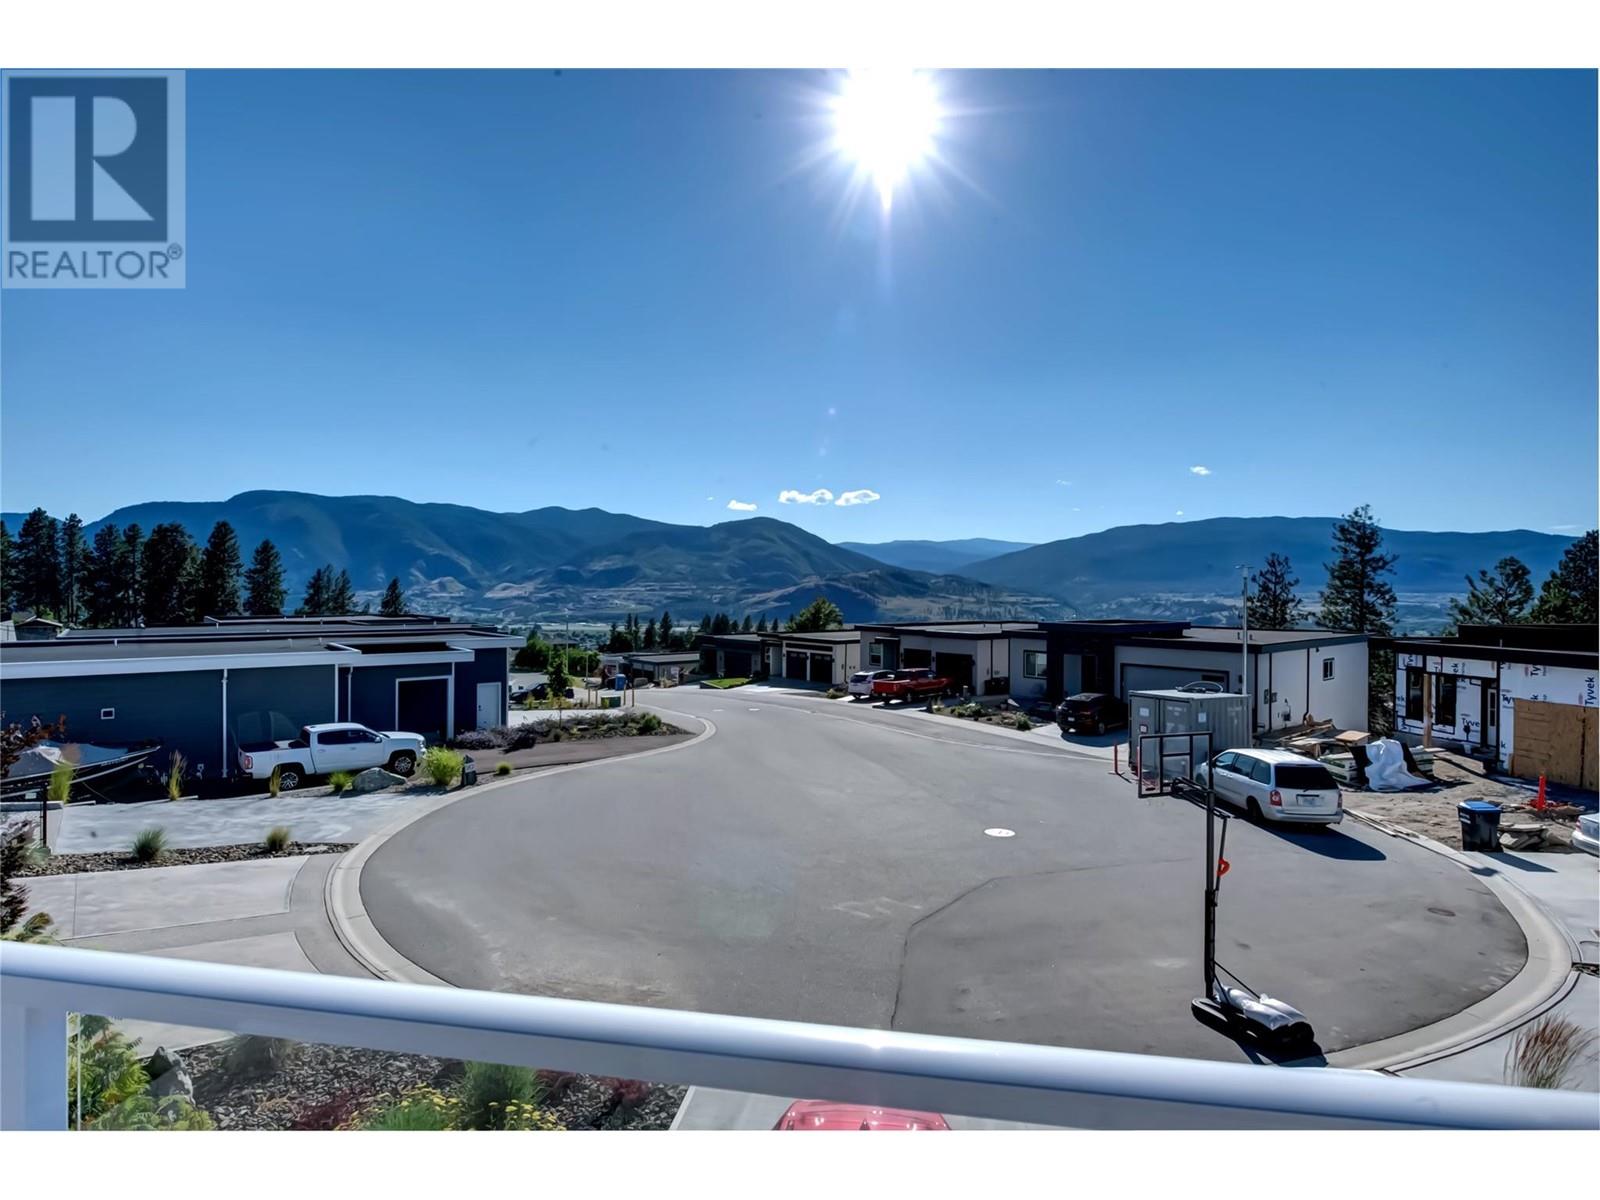  150 AVERY Place, Penticton